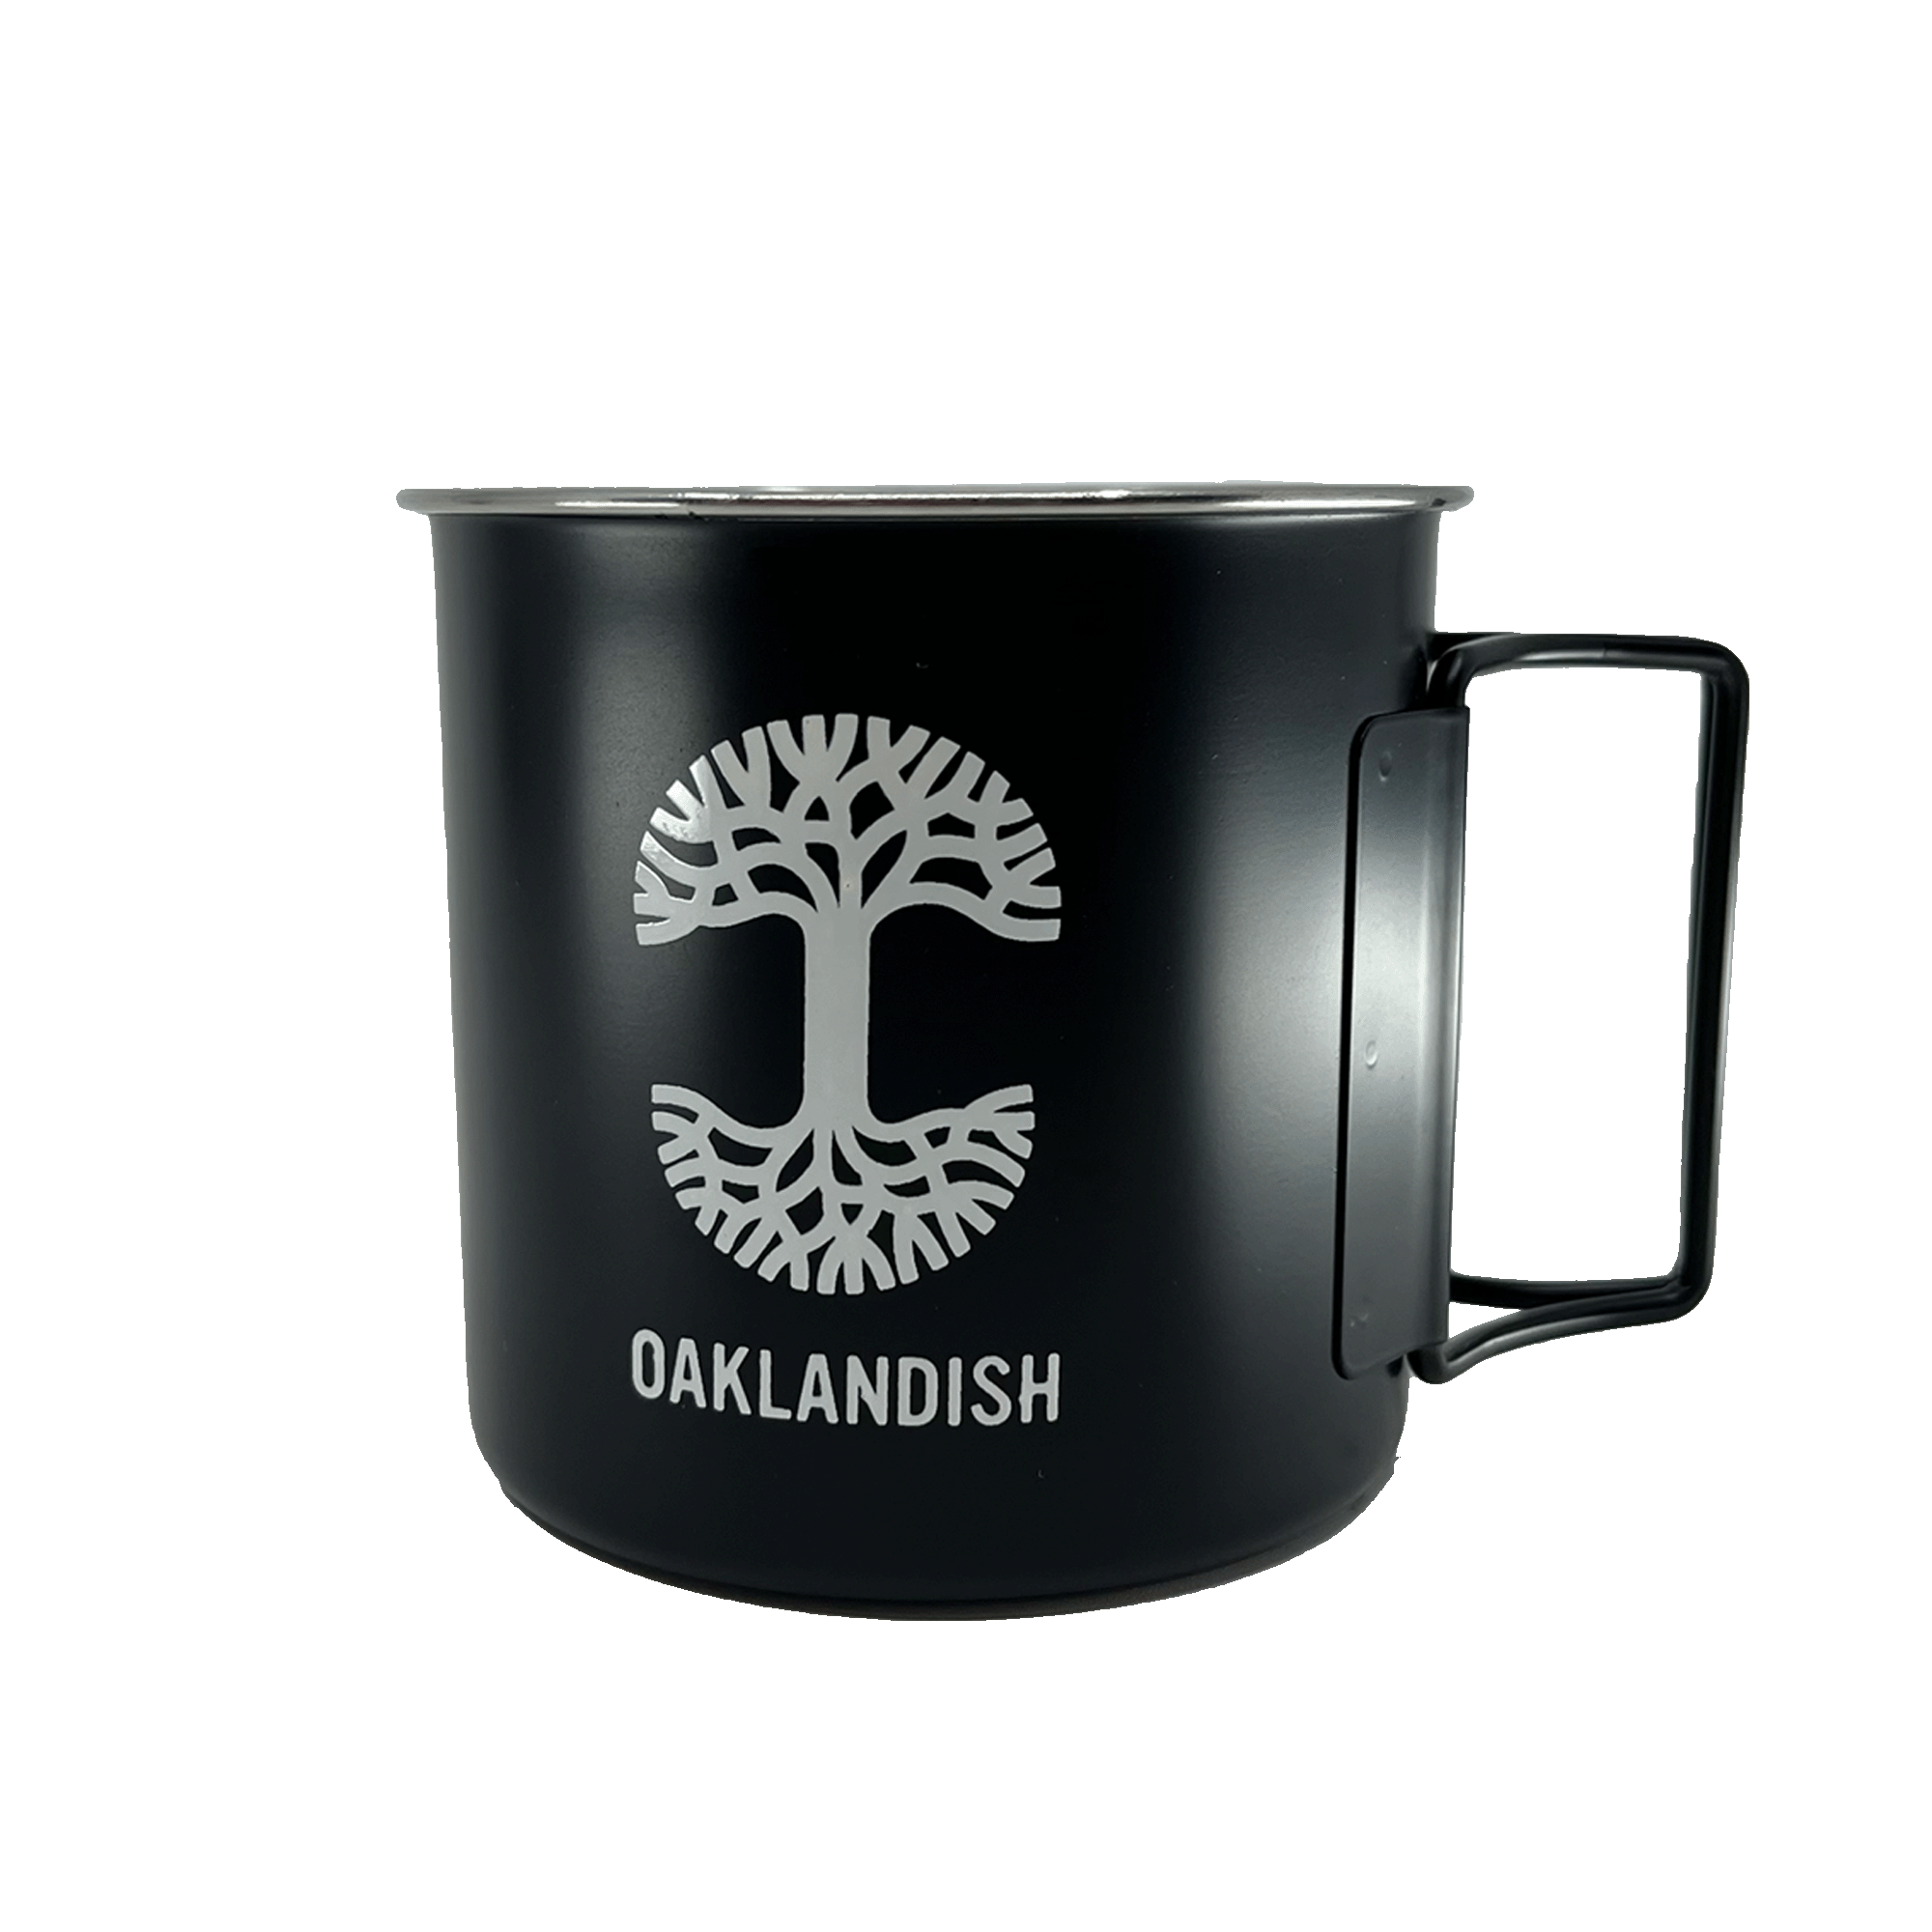 Black stainless steel camp mug with open collapsable handle, large white Oaklandish tree logo, and wordmark.